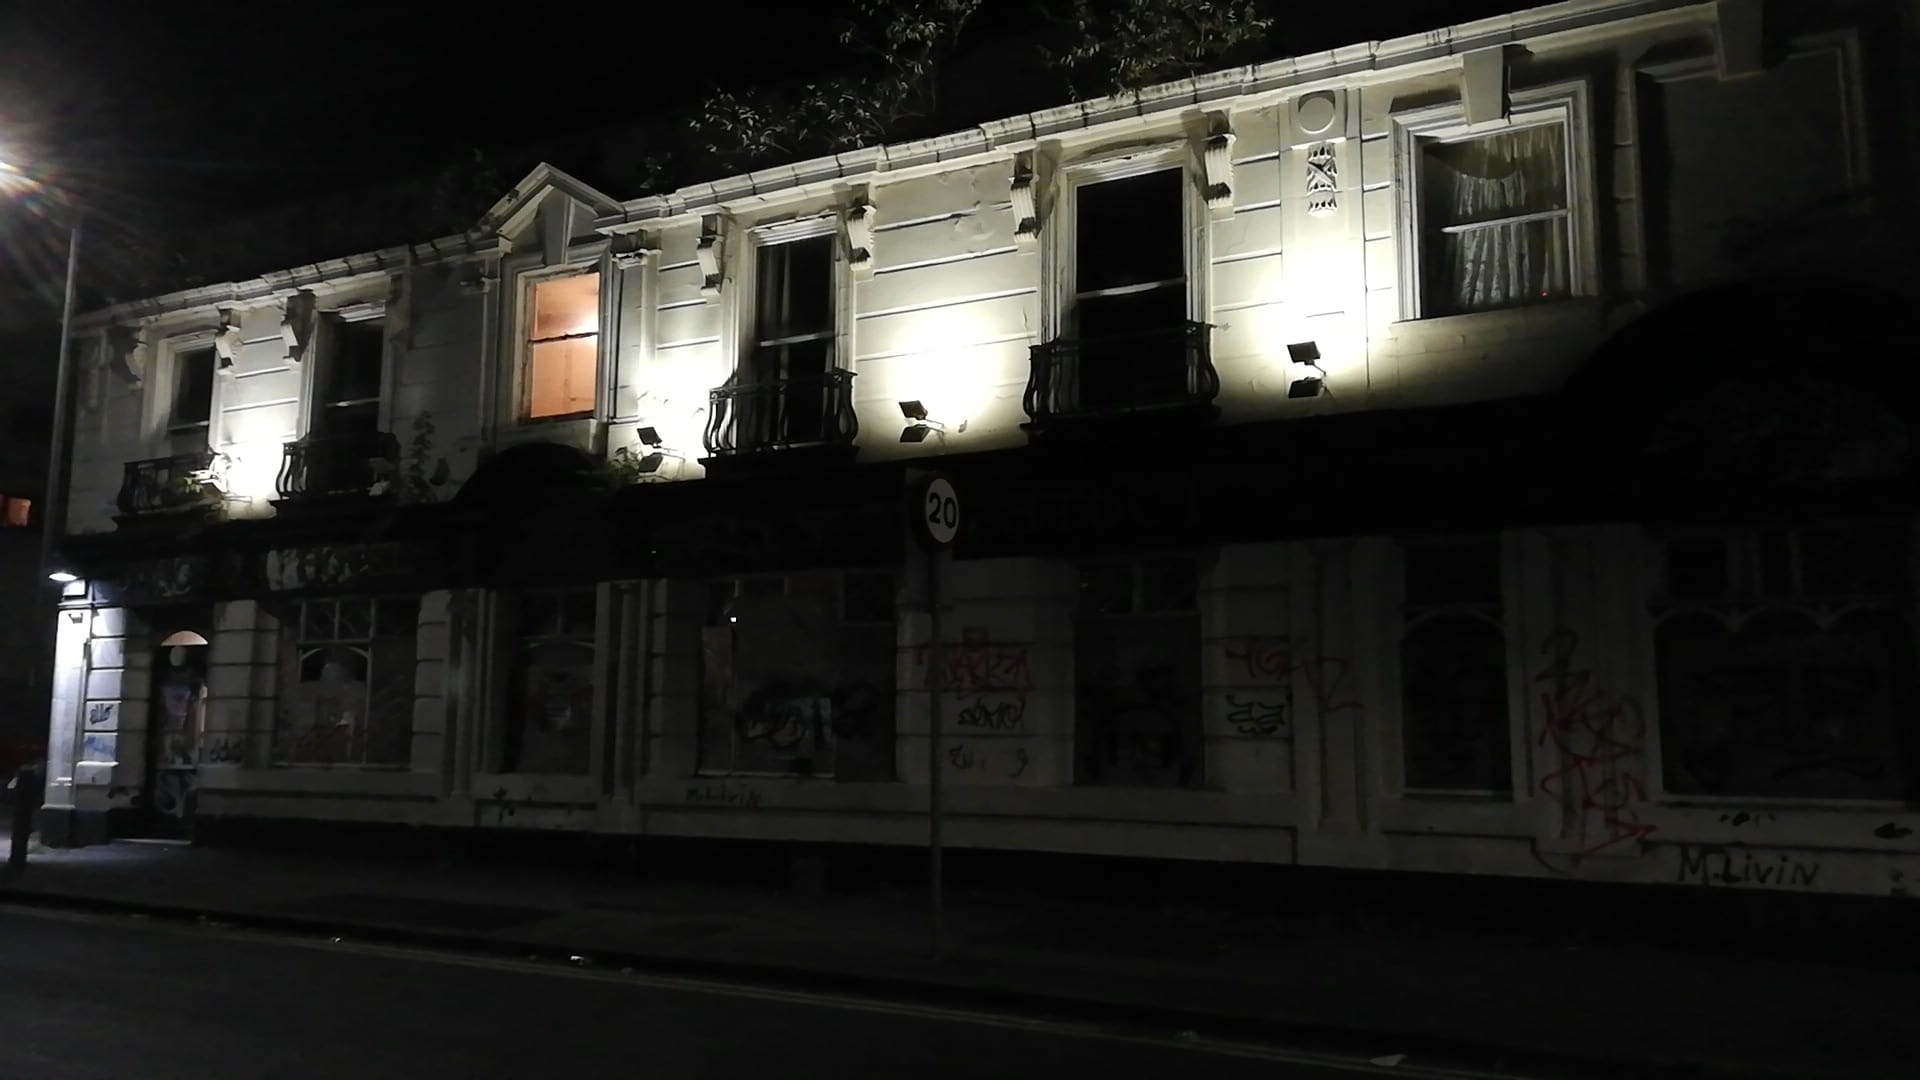 Photo of The Junction Pub on Rolls Crescent at night. There is a light on in one of the windows and the external lights on the building are also lit, illuminating the first floor of the building.